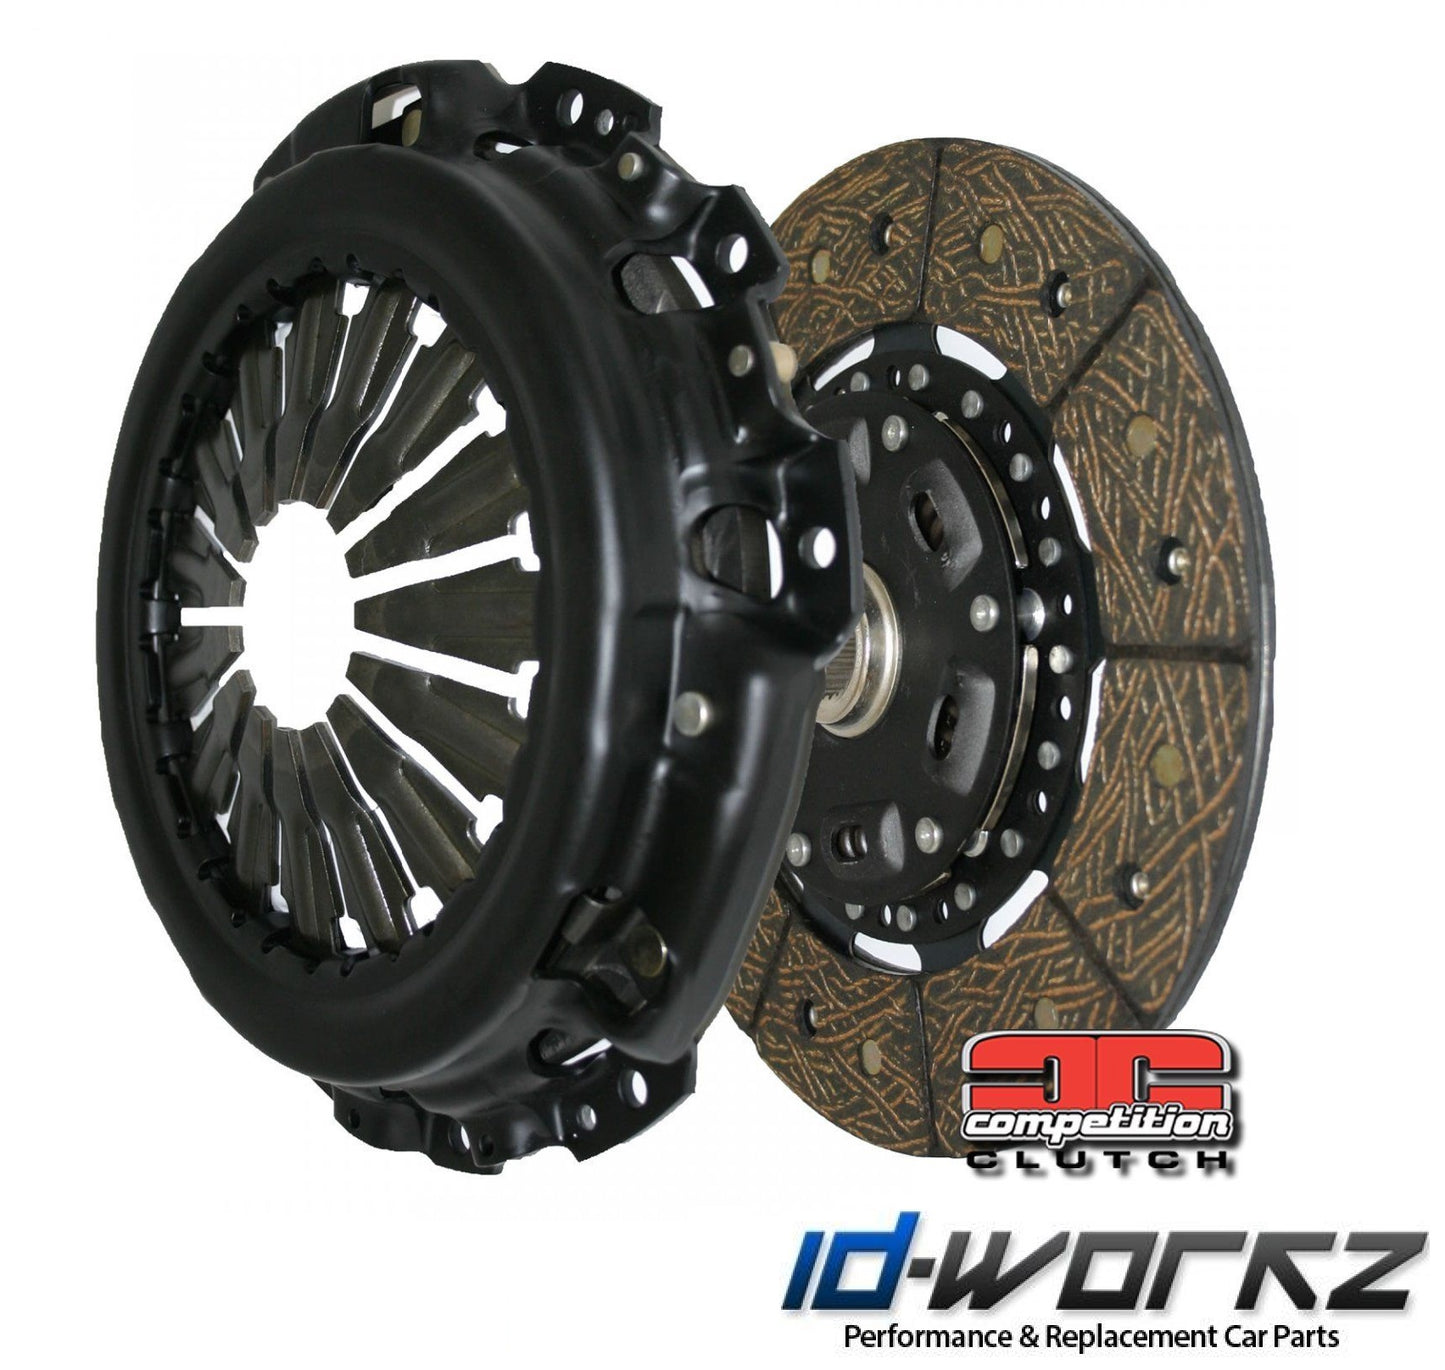 Competition Clutch Kit Stage 2 - Toyota Supra 1JZGTE / 7MGTE (R154 Gearbox)